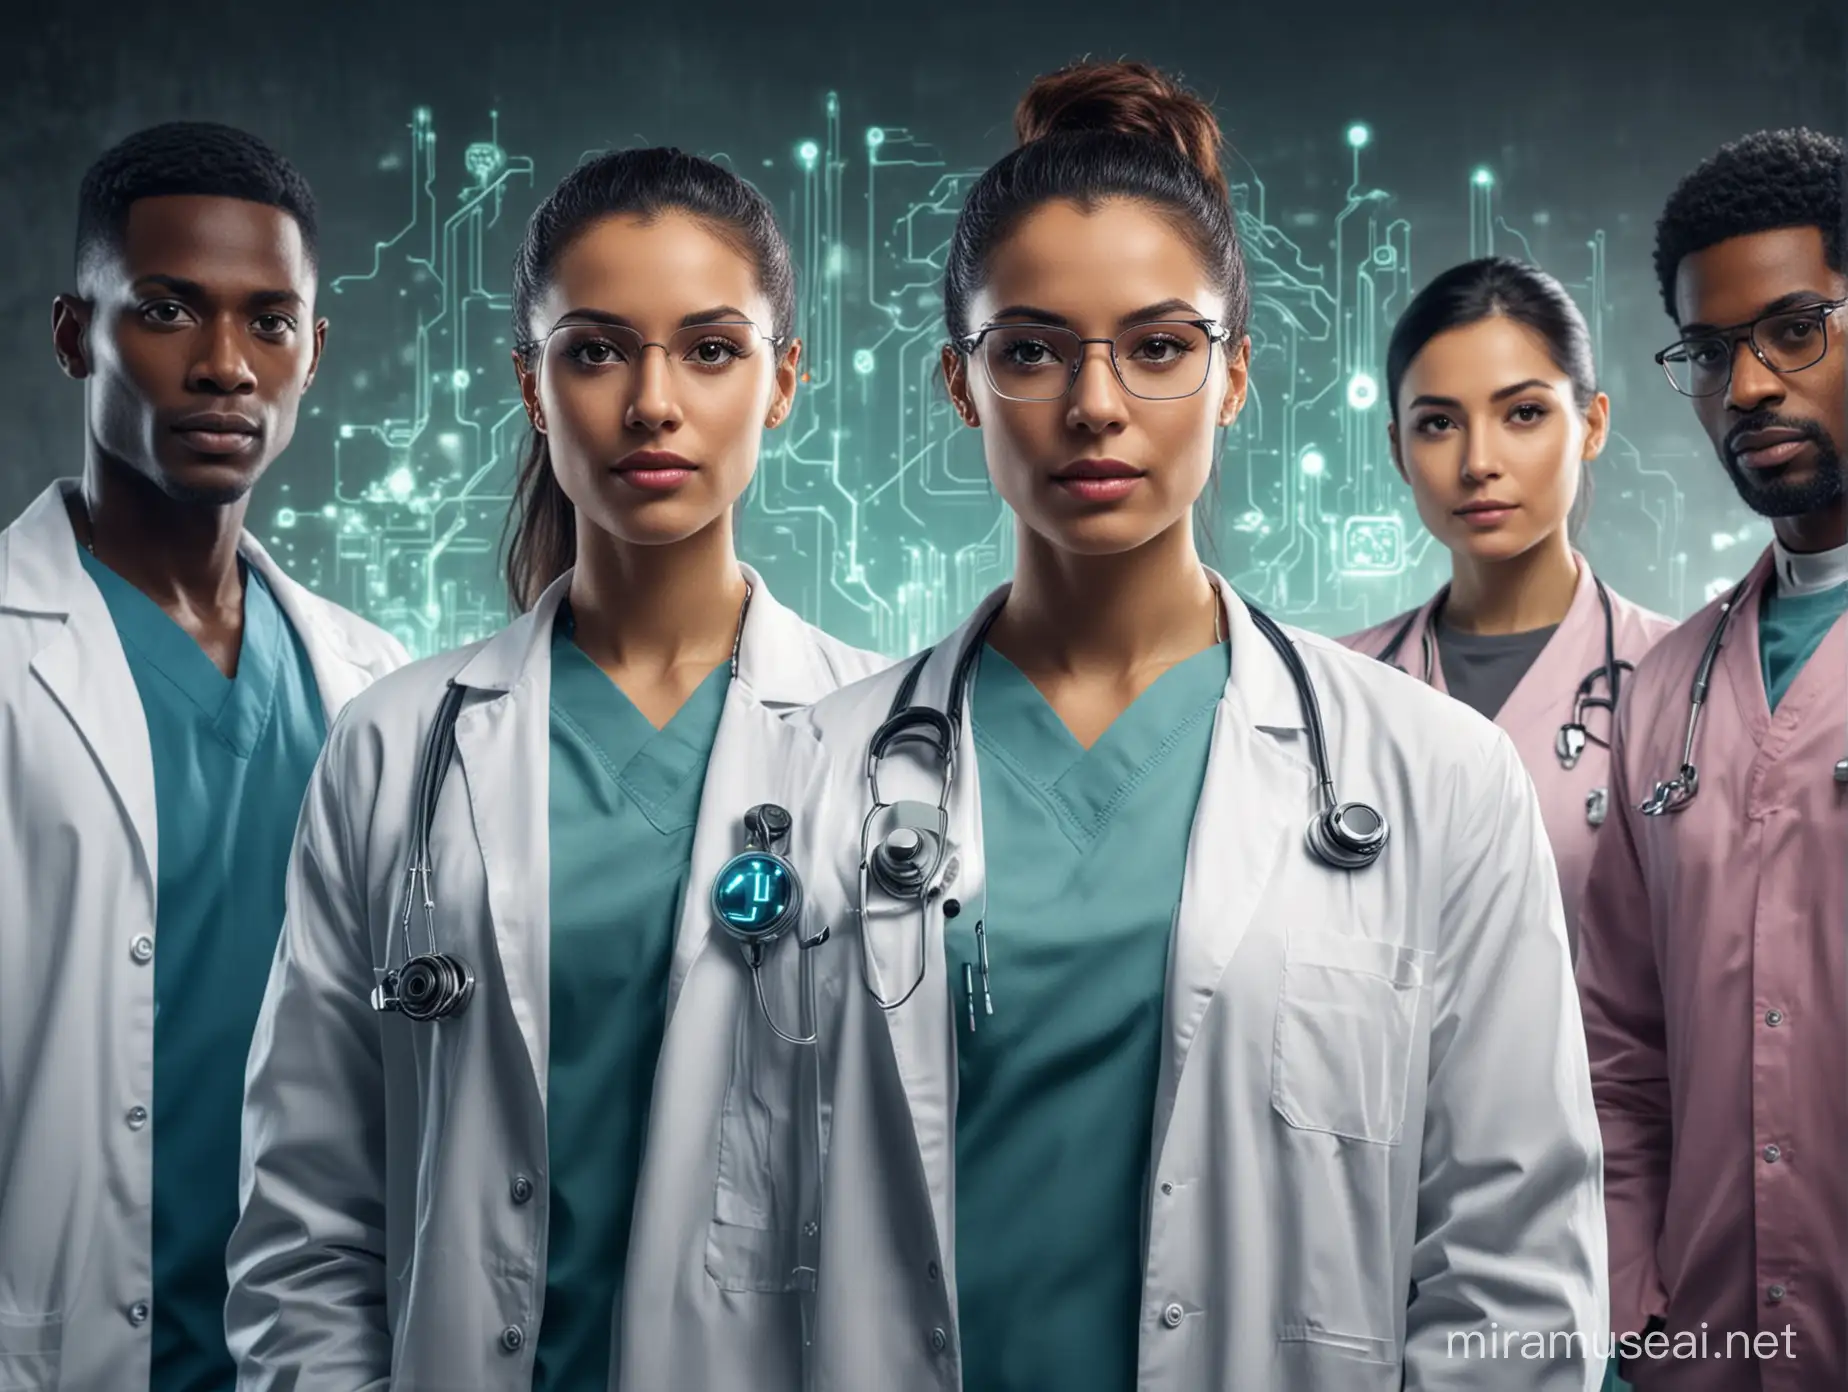 Diverse Cyberpunk Doctors in Artificial Intelligence Conclave